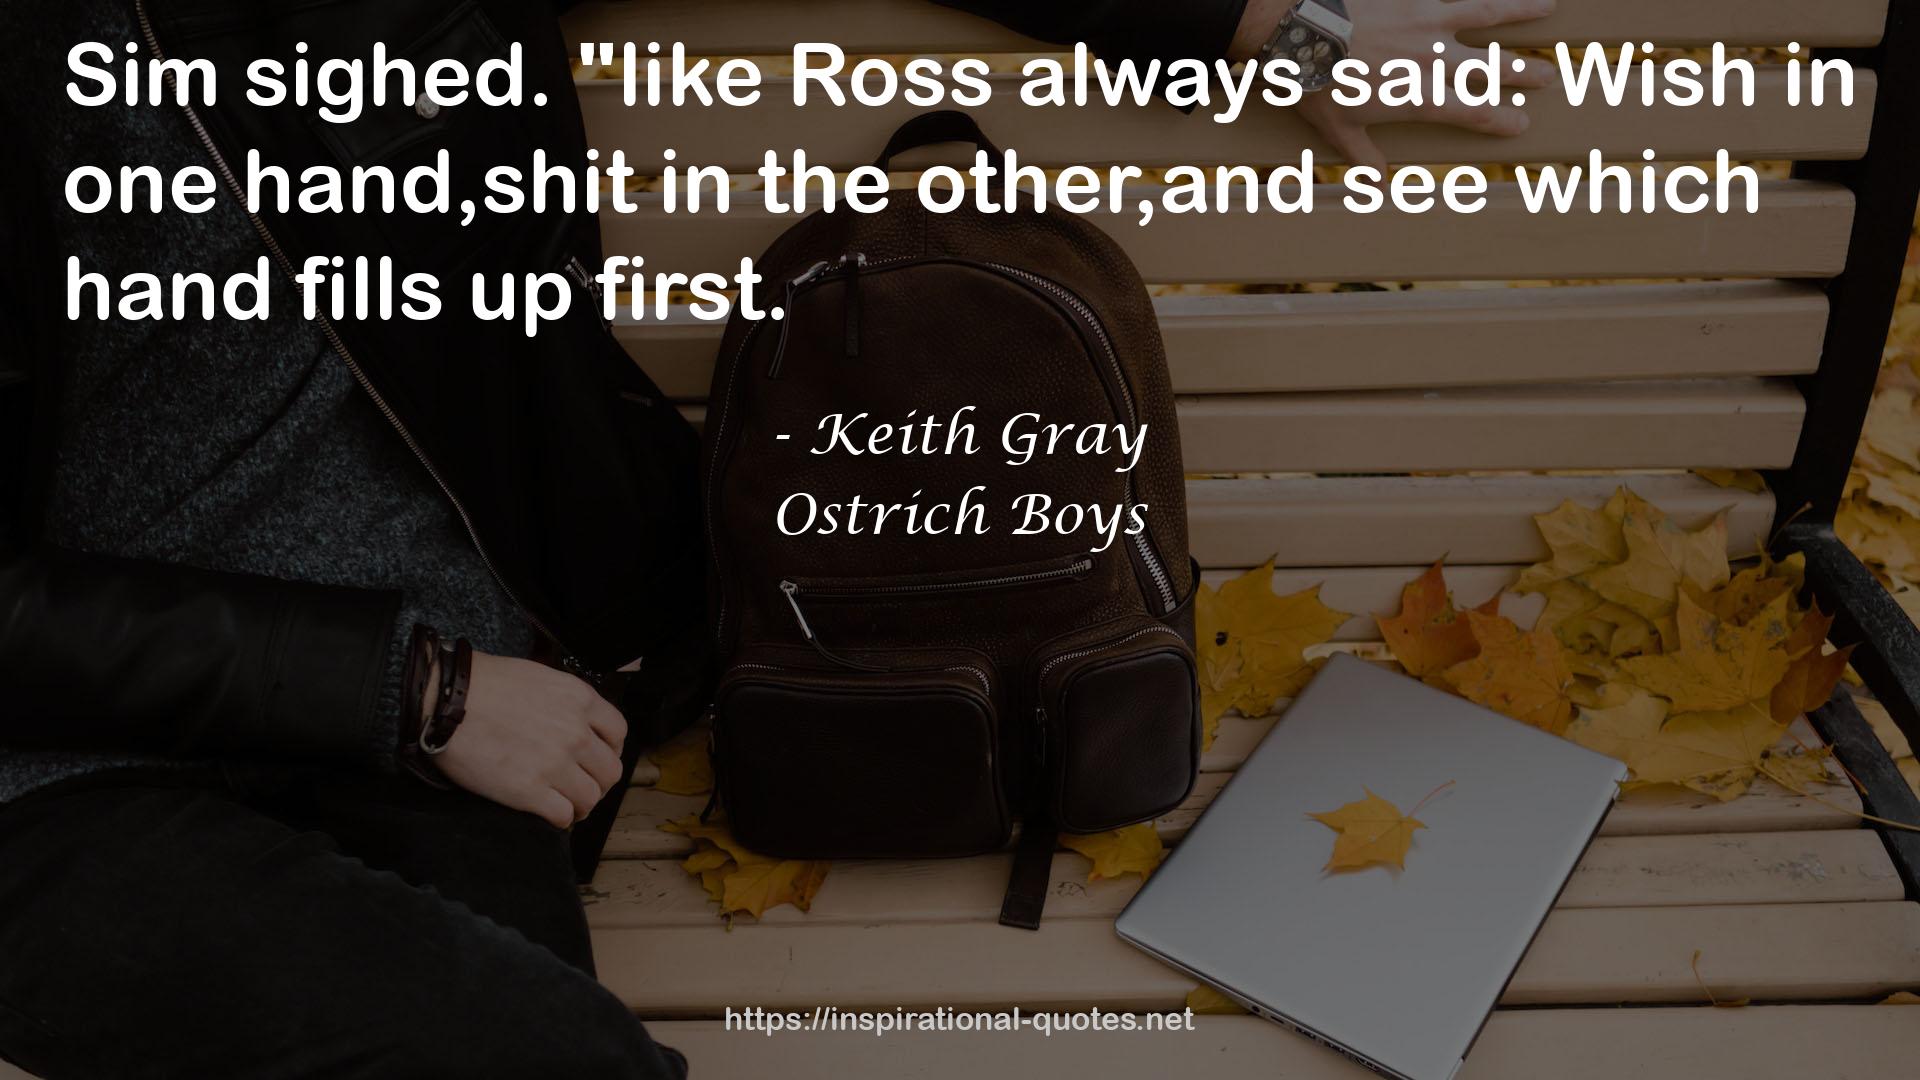 Keith Gray QUOTES